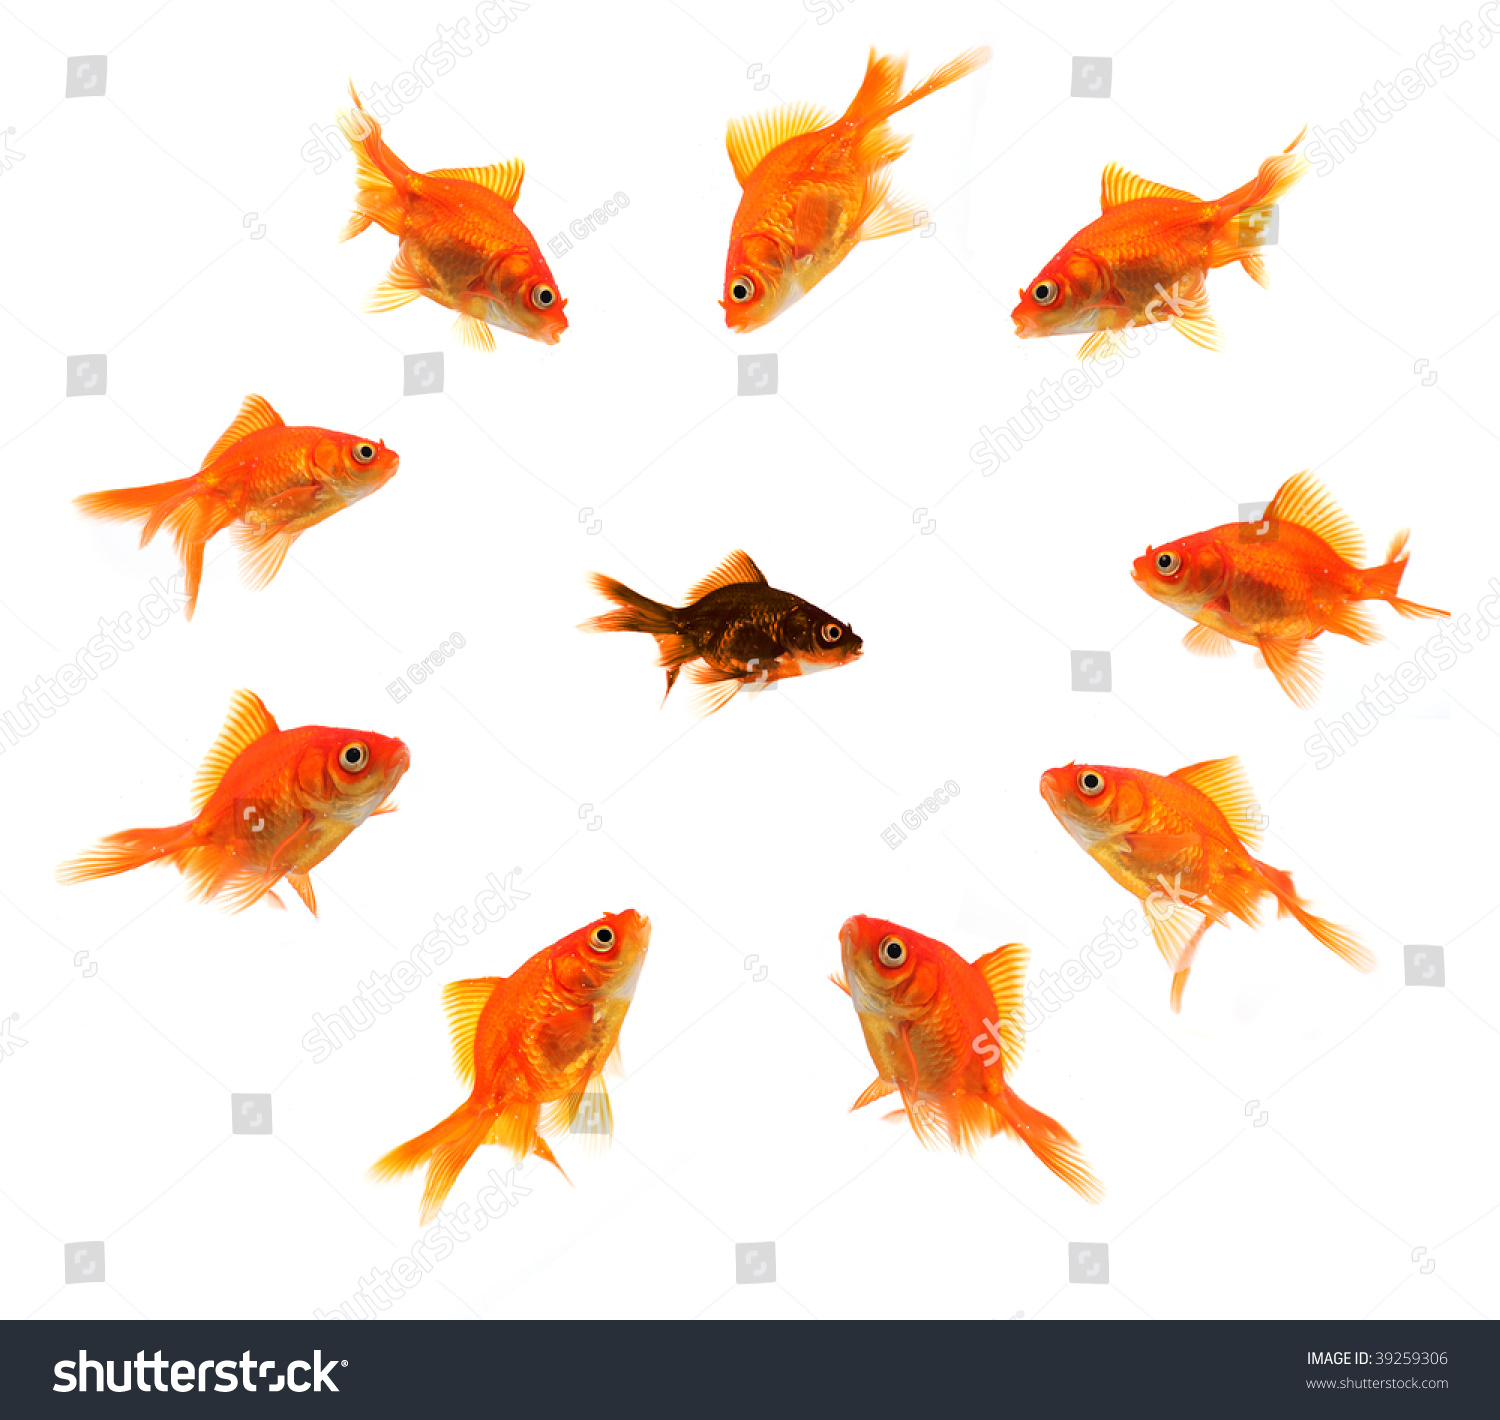 Black Goldfish Surrounded By Bully Gang Stock Photo (Royalty Free ...